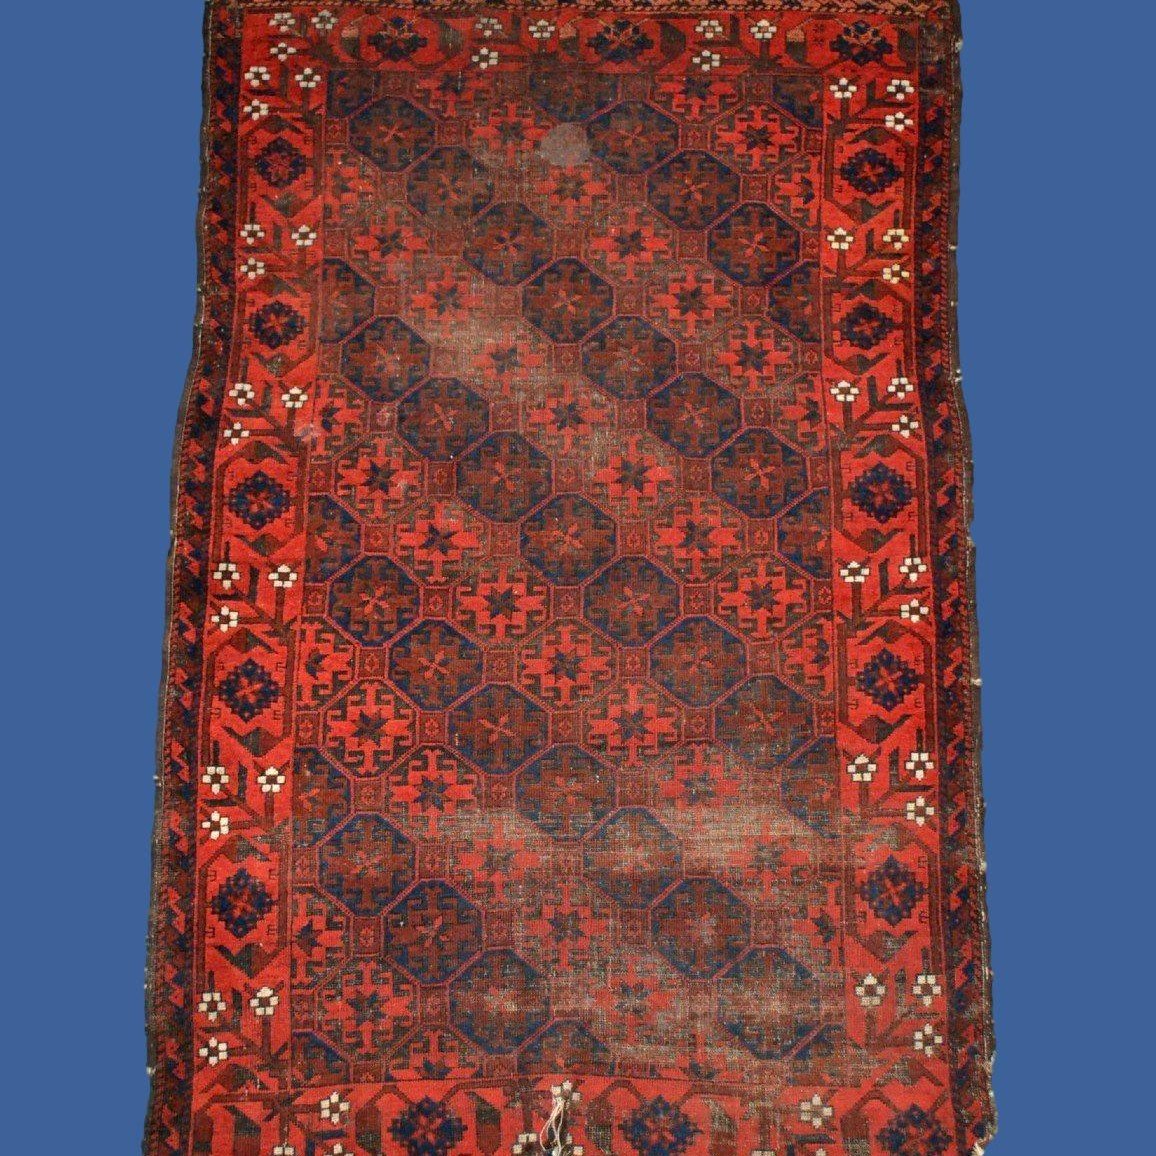 Old Merkan Rug, 105 Cm X 167 Cm, In Wool On Hand-knotted Wool In Central Asia Around 1850